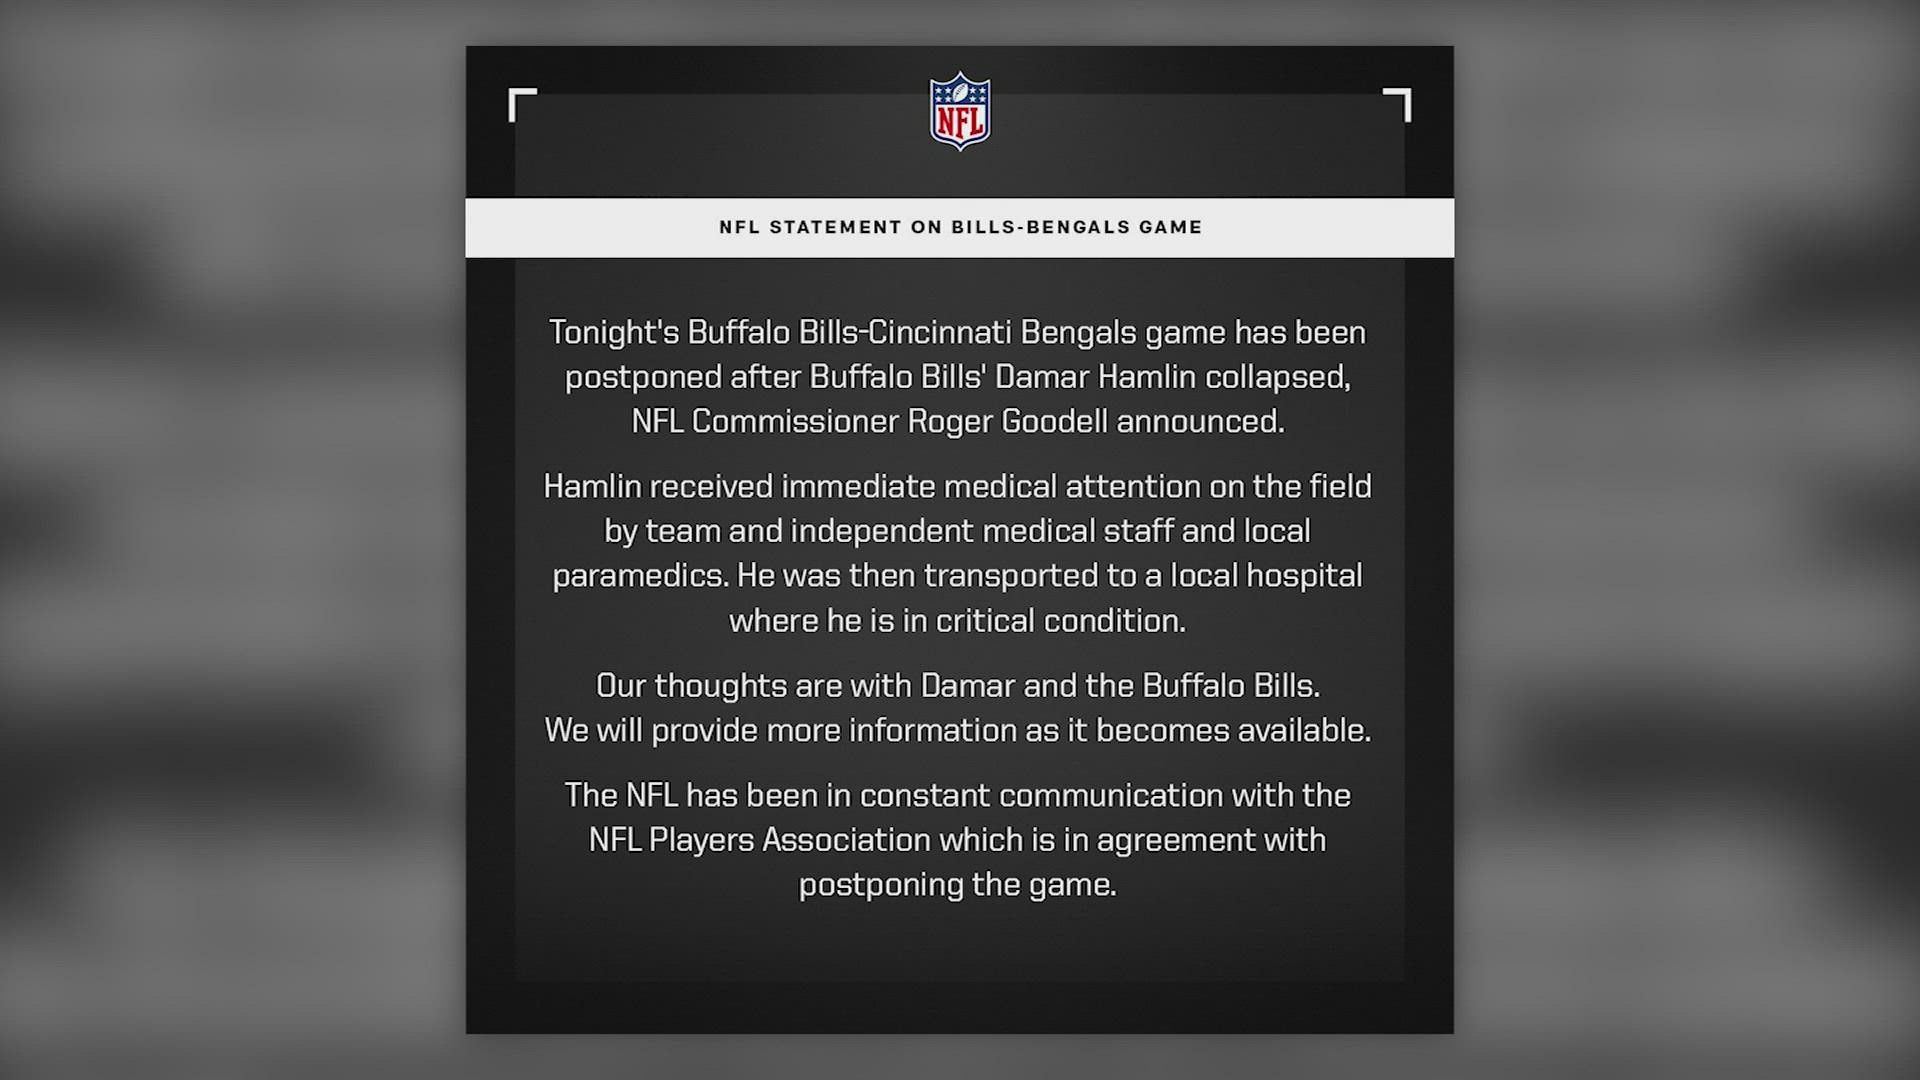 The NFL released a statement after Bills' Damar Hamlin was rushed to the hospital after collapsing on the field during the Bills-Bengals game on Jan. 2.